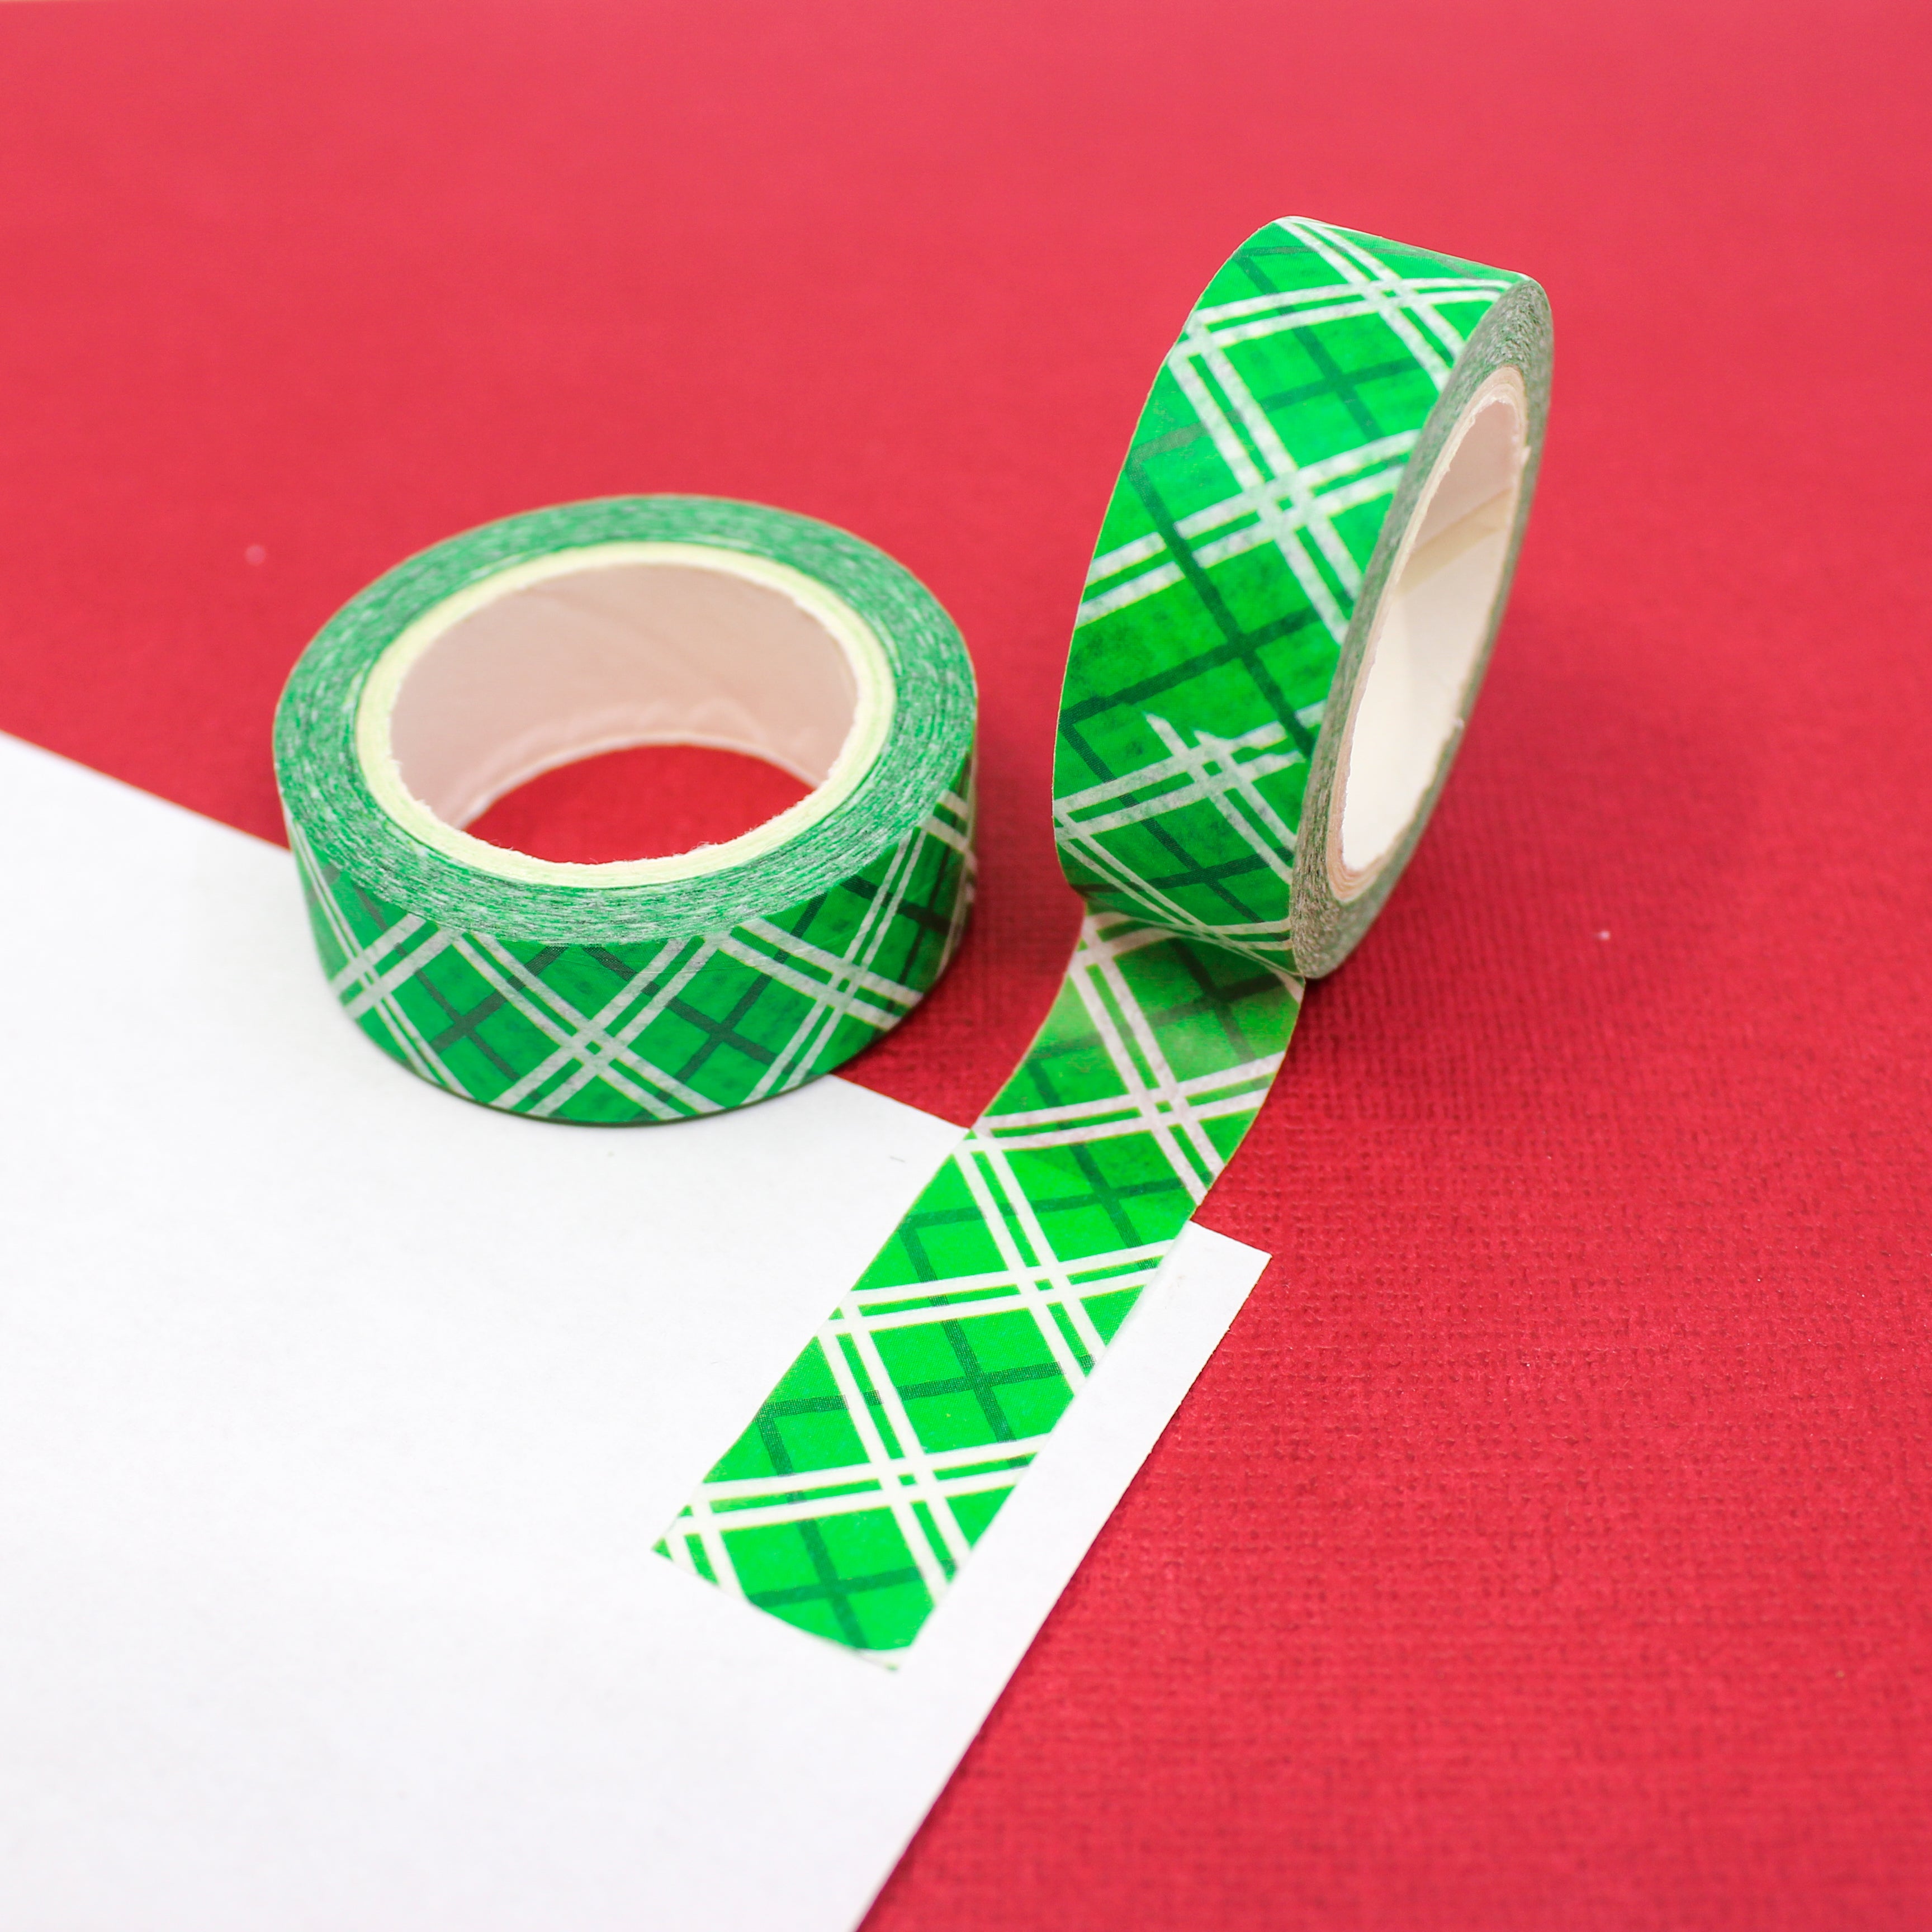 This festive green plaid is perfect for craft projects and spreads throughout the year. It's also perfect for holiday projects or even a father's day card to match his plaid ties and socks. This tape is sold at BBB Supplies Craft Shop.